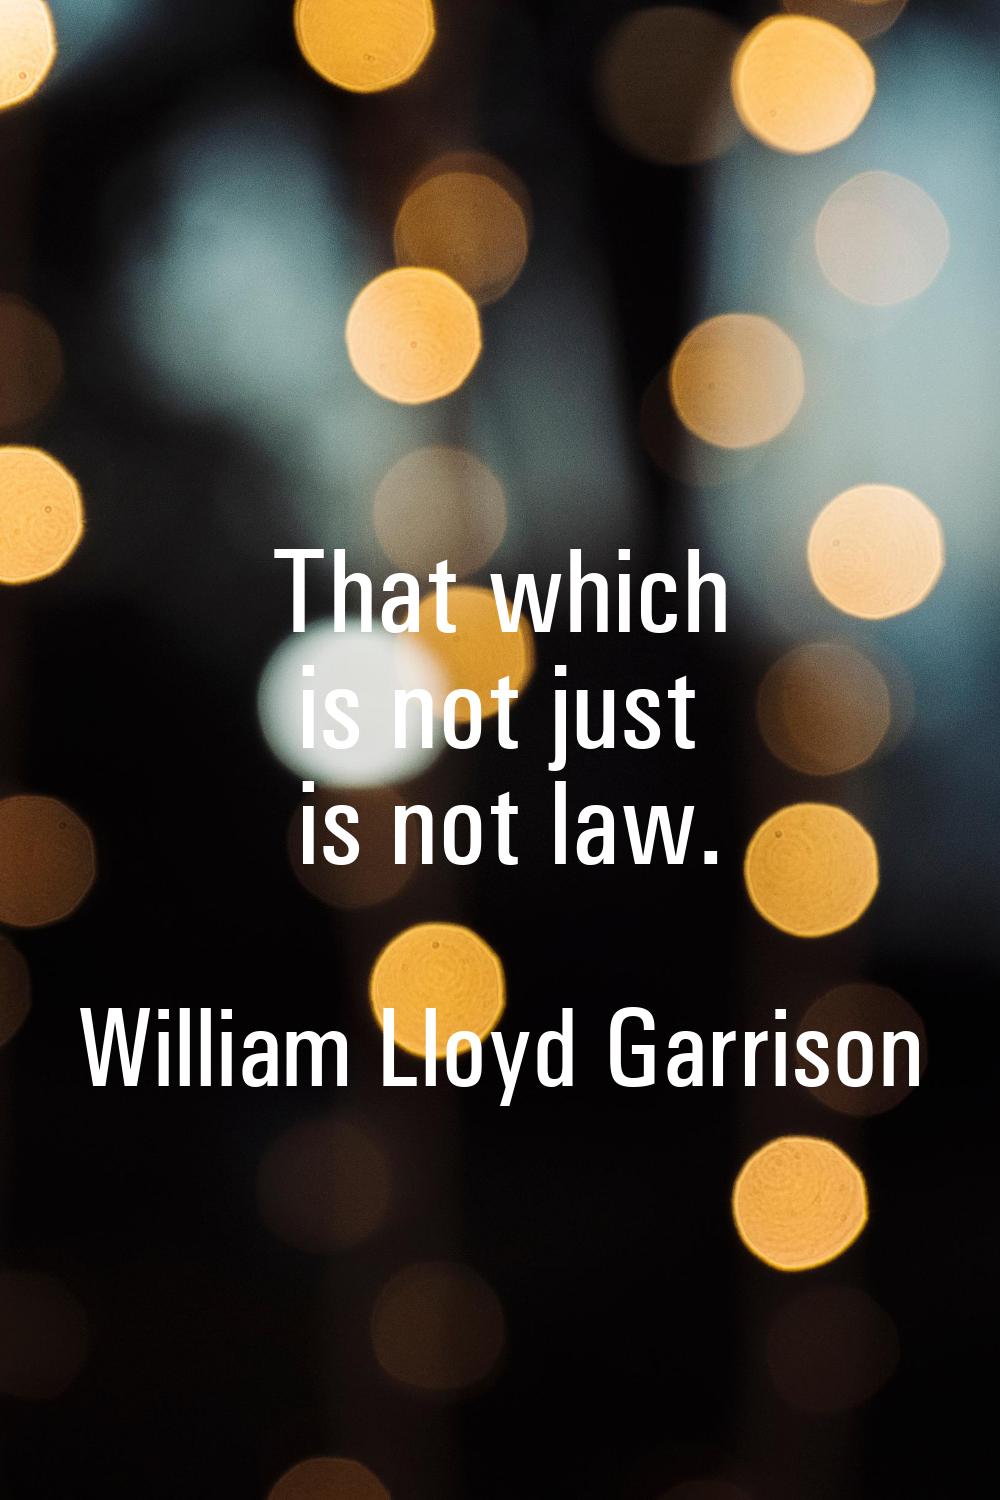 That which is not just is not law.